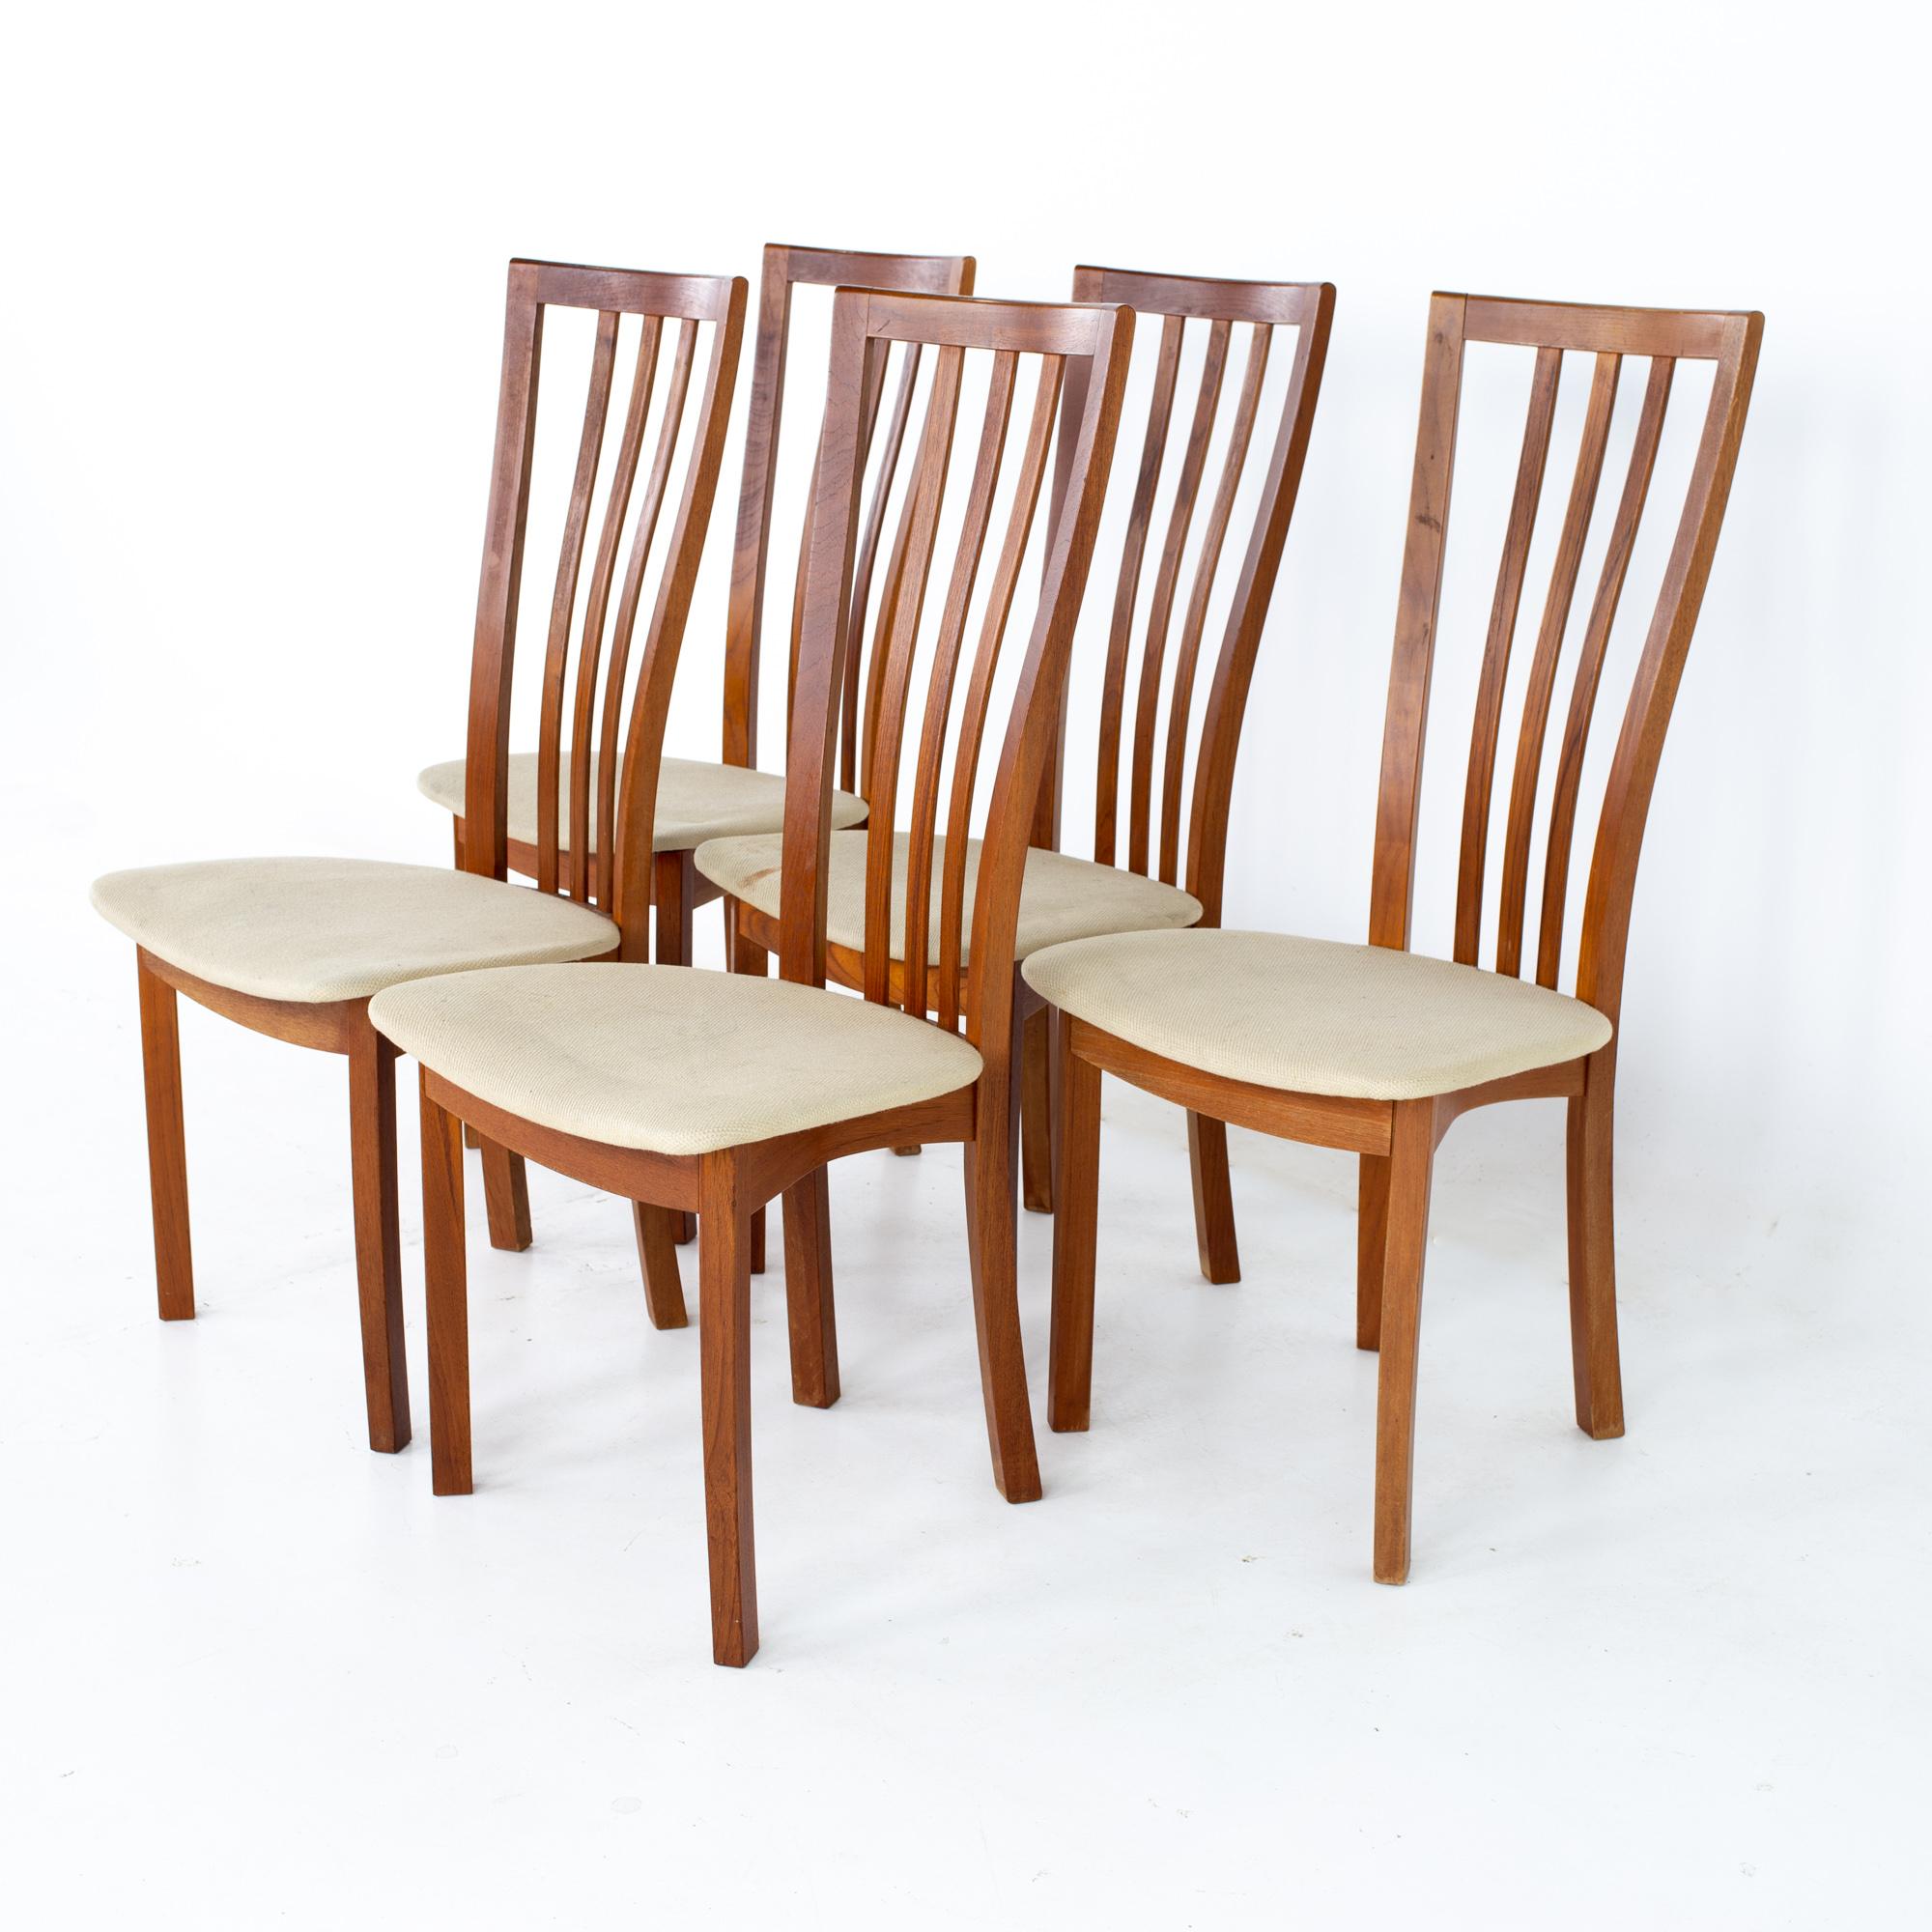 Mid century Danish teak dining chairs - Set of 5
Each chair measures: 19 wide x 21.25 deep x 41.75 high, with a seat height of 18.5 inches

All pieces of furniture can be had in what we call restored vintage condition. That means the piece is